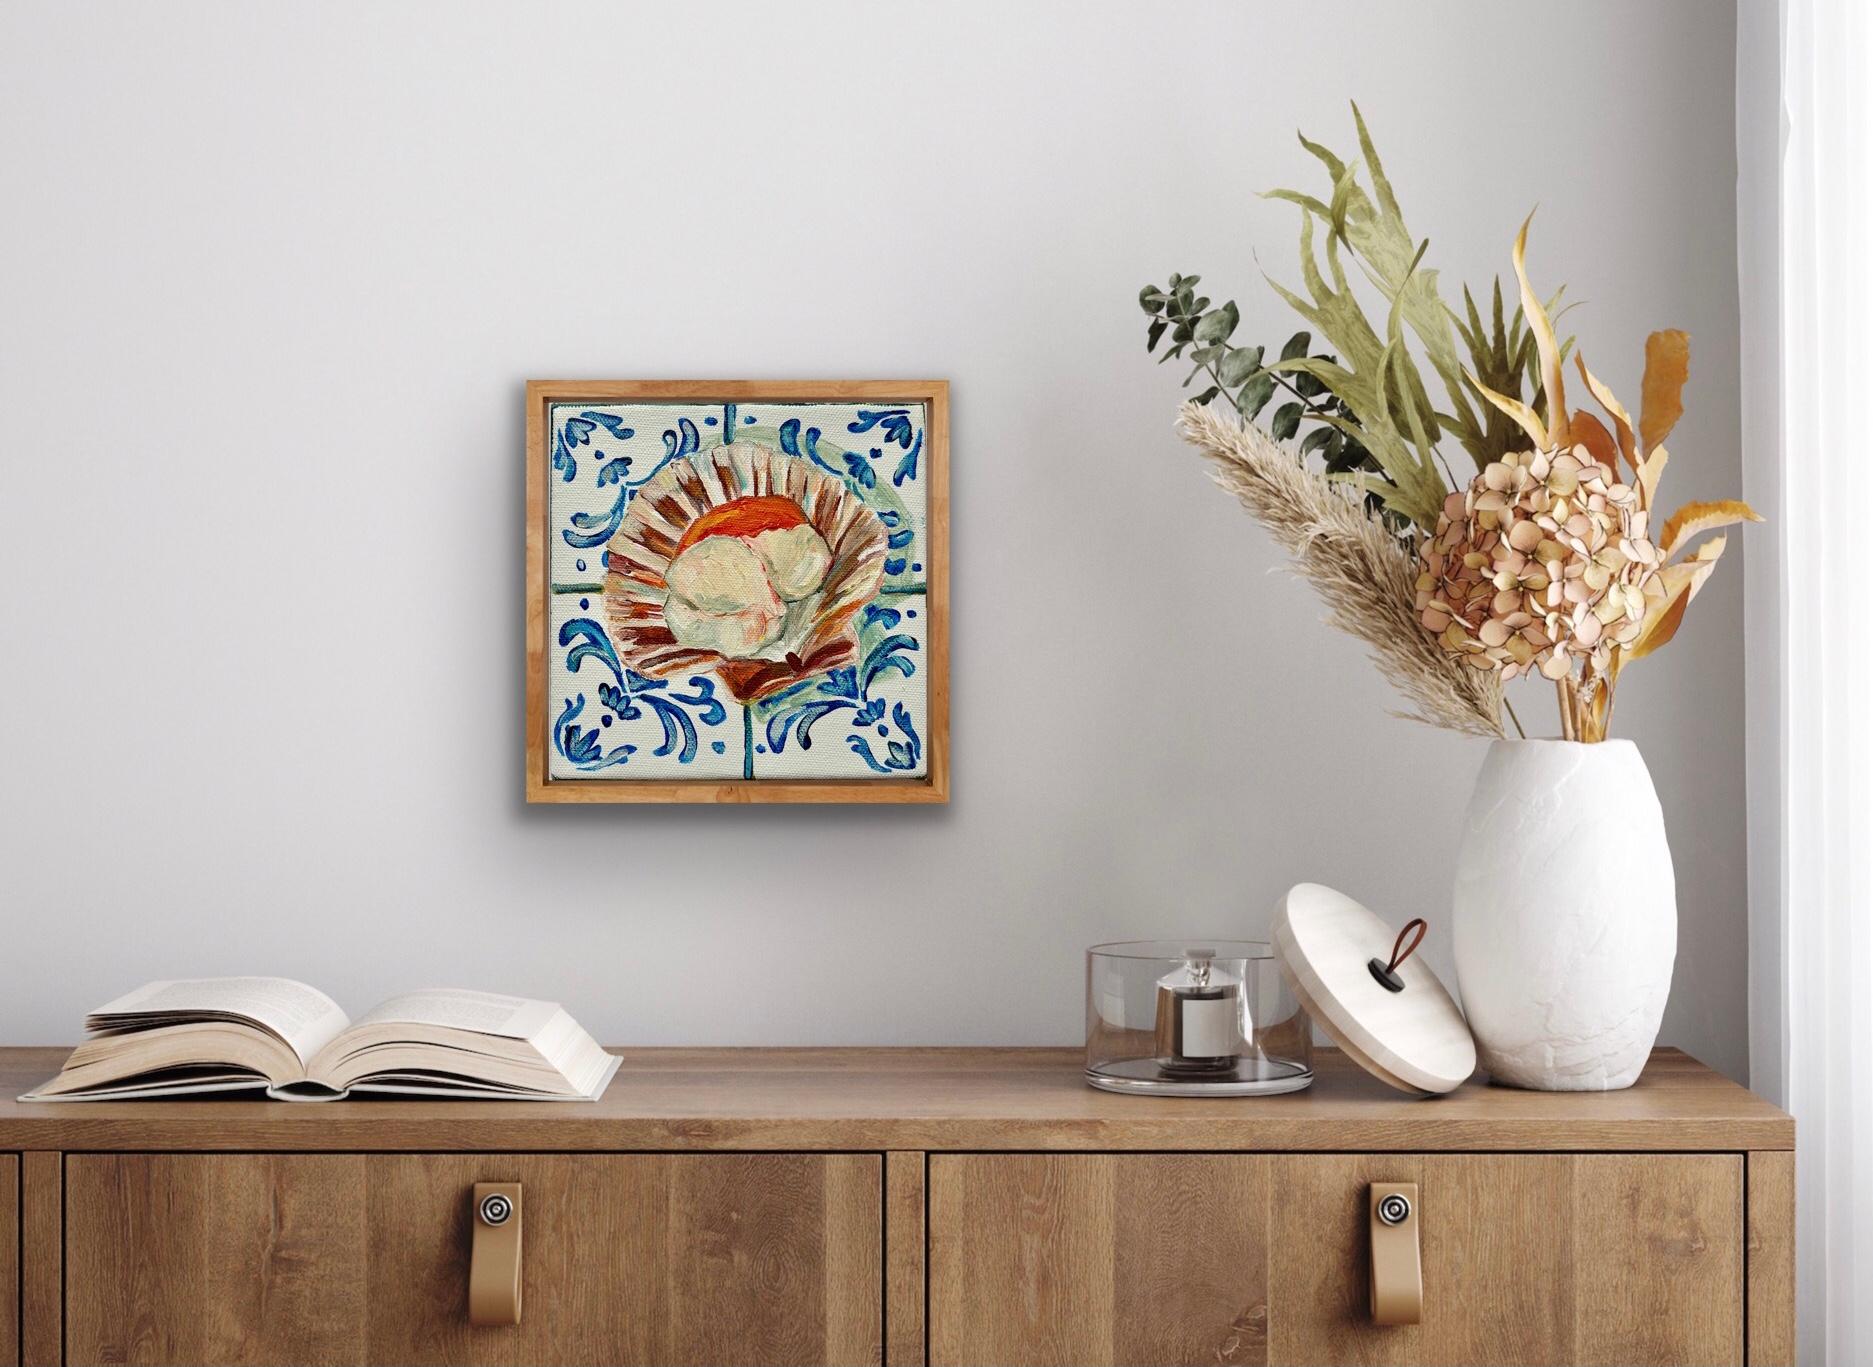 Scallop on Tiles, Original painting, Food art, Seafood, Mediterranean style  - Painting by Pippa Smith